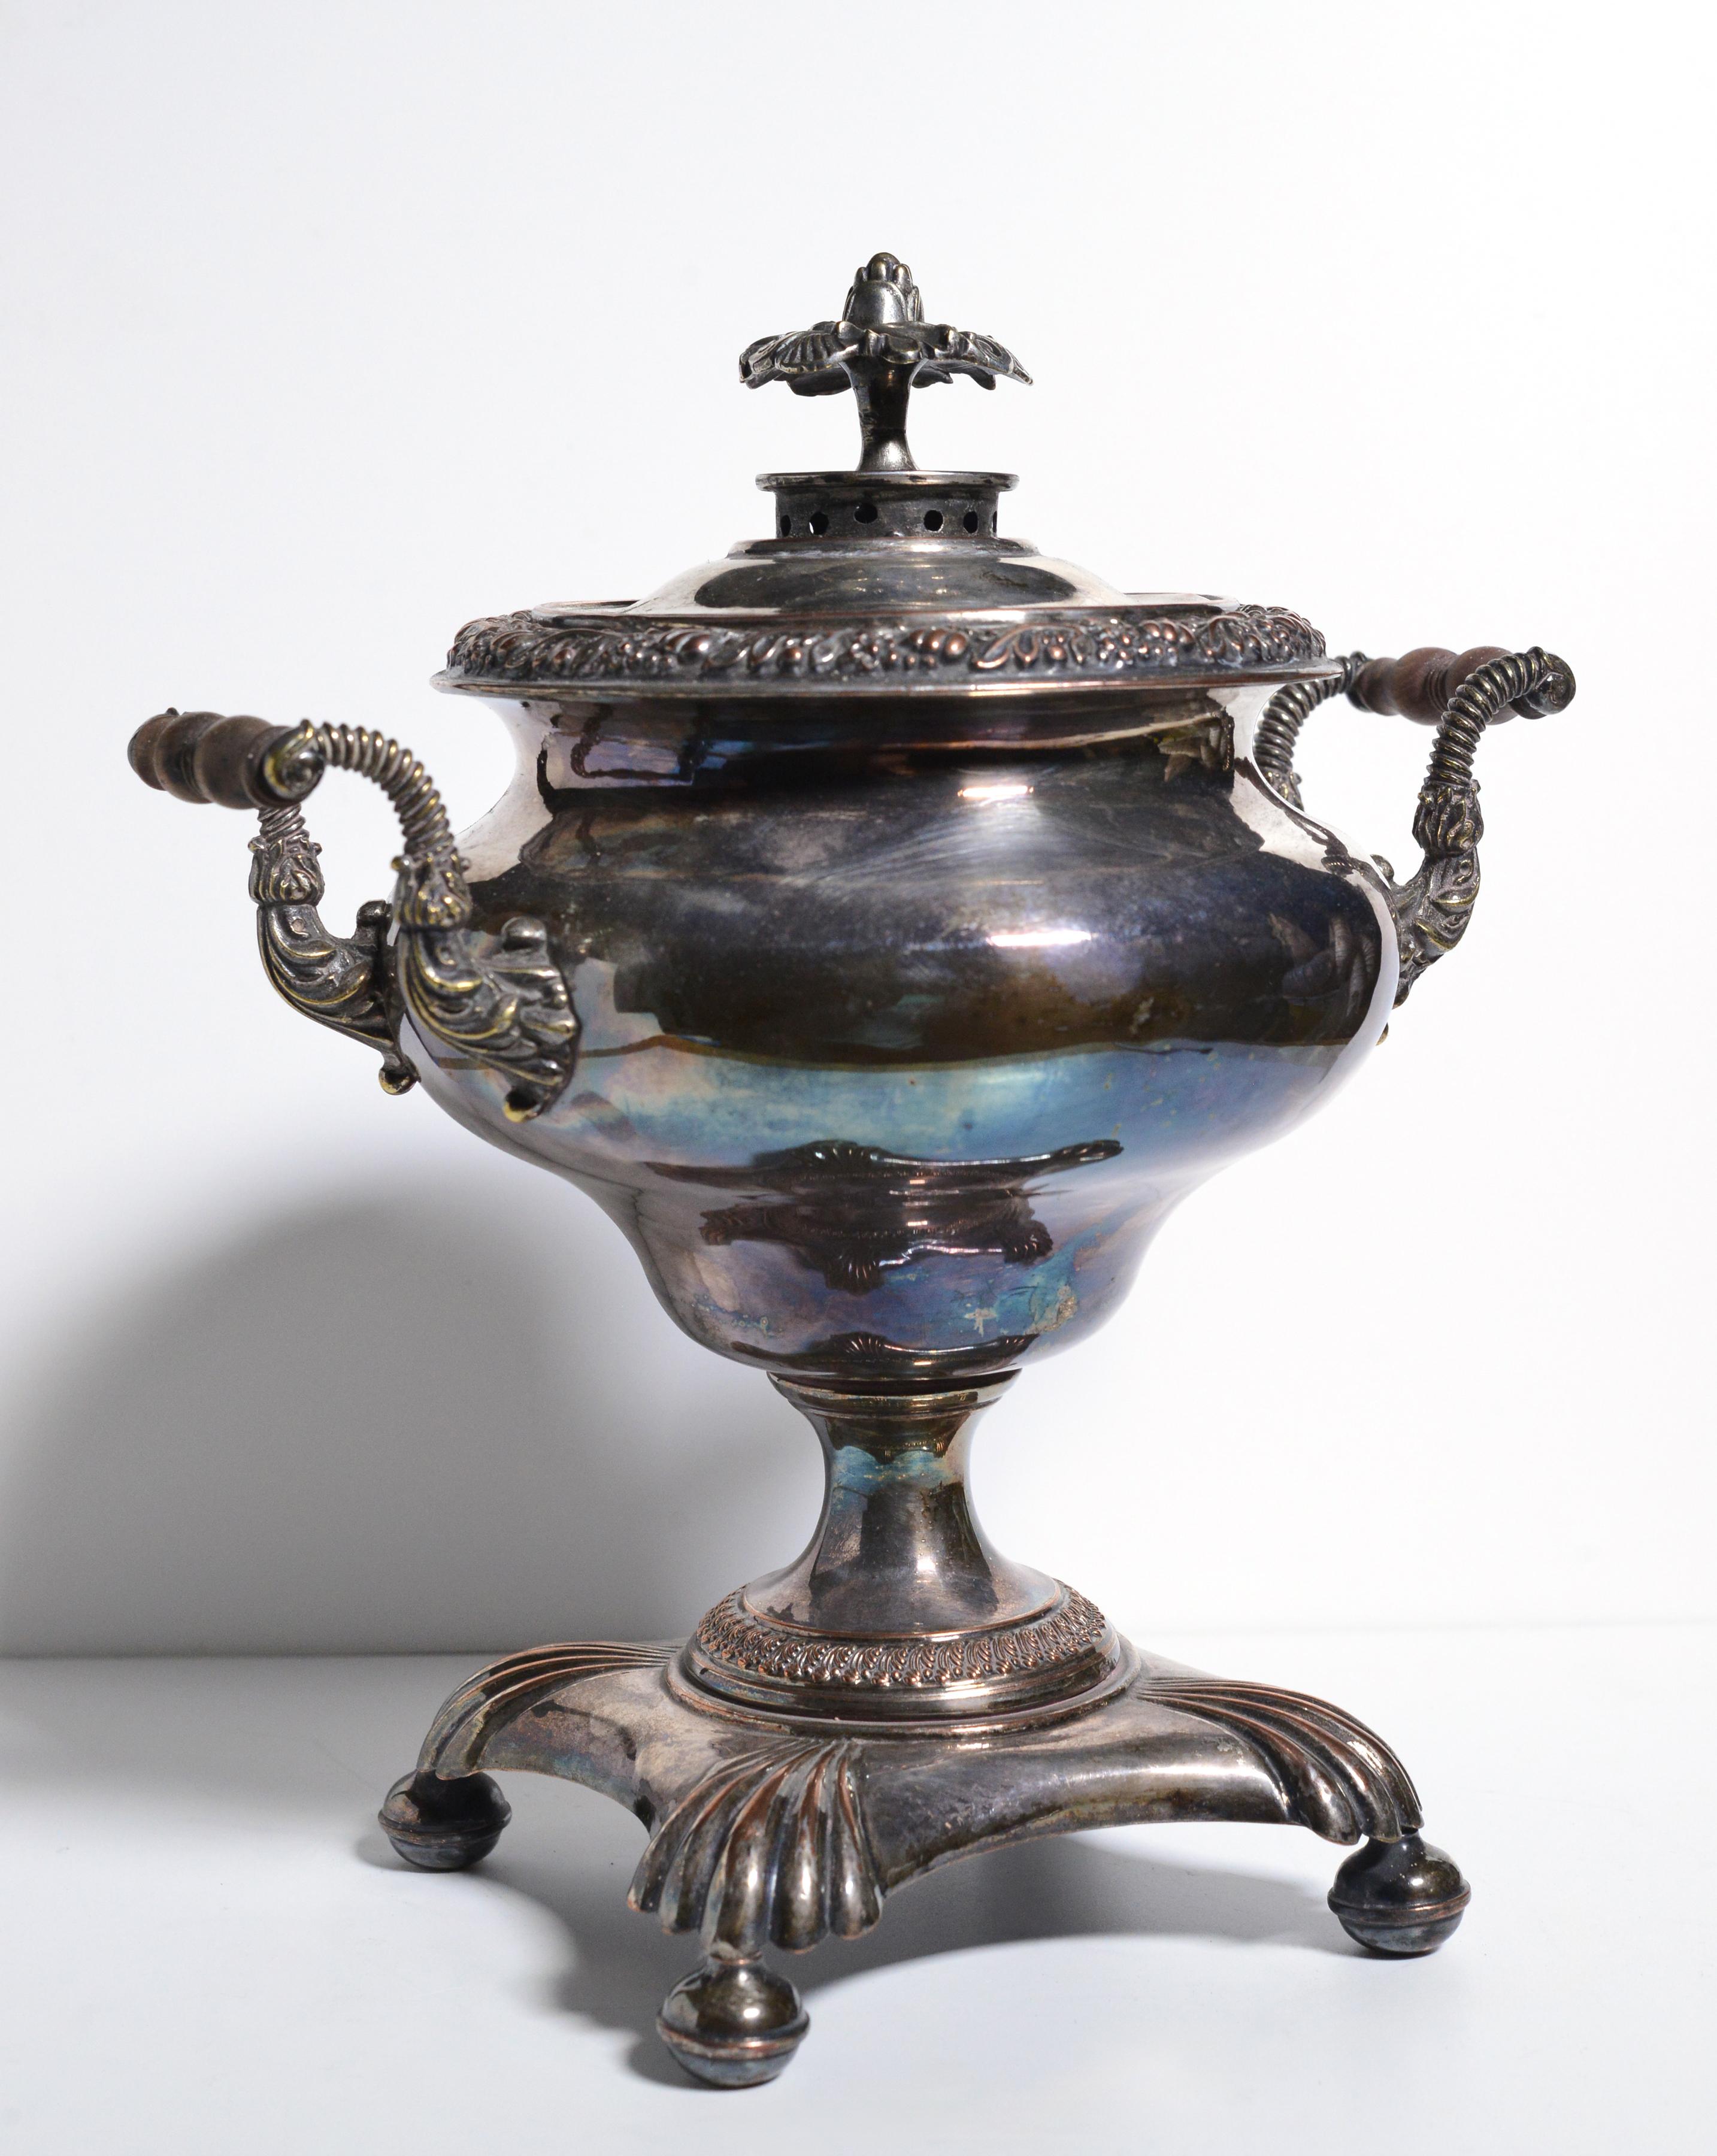 Copper body tea urn decorated with hand chased brass cast and silver plating. This is pretty rare fire operated samovar of beautiful artisan performance. This samovar can also be used for its intended purpose, medium size for few persons with